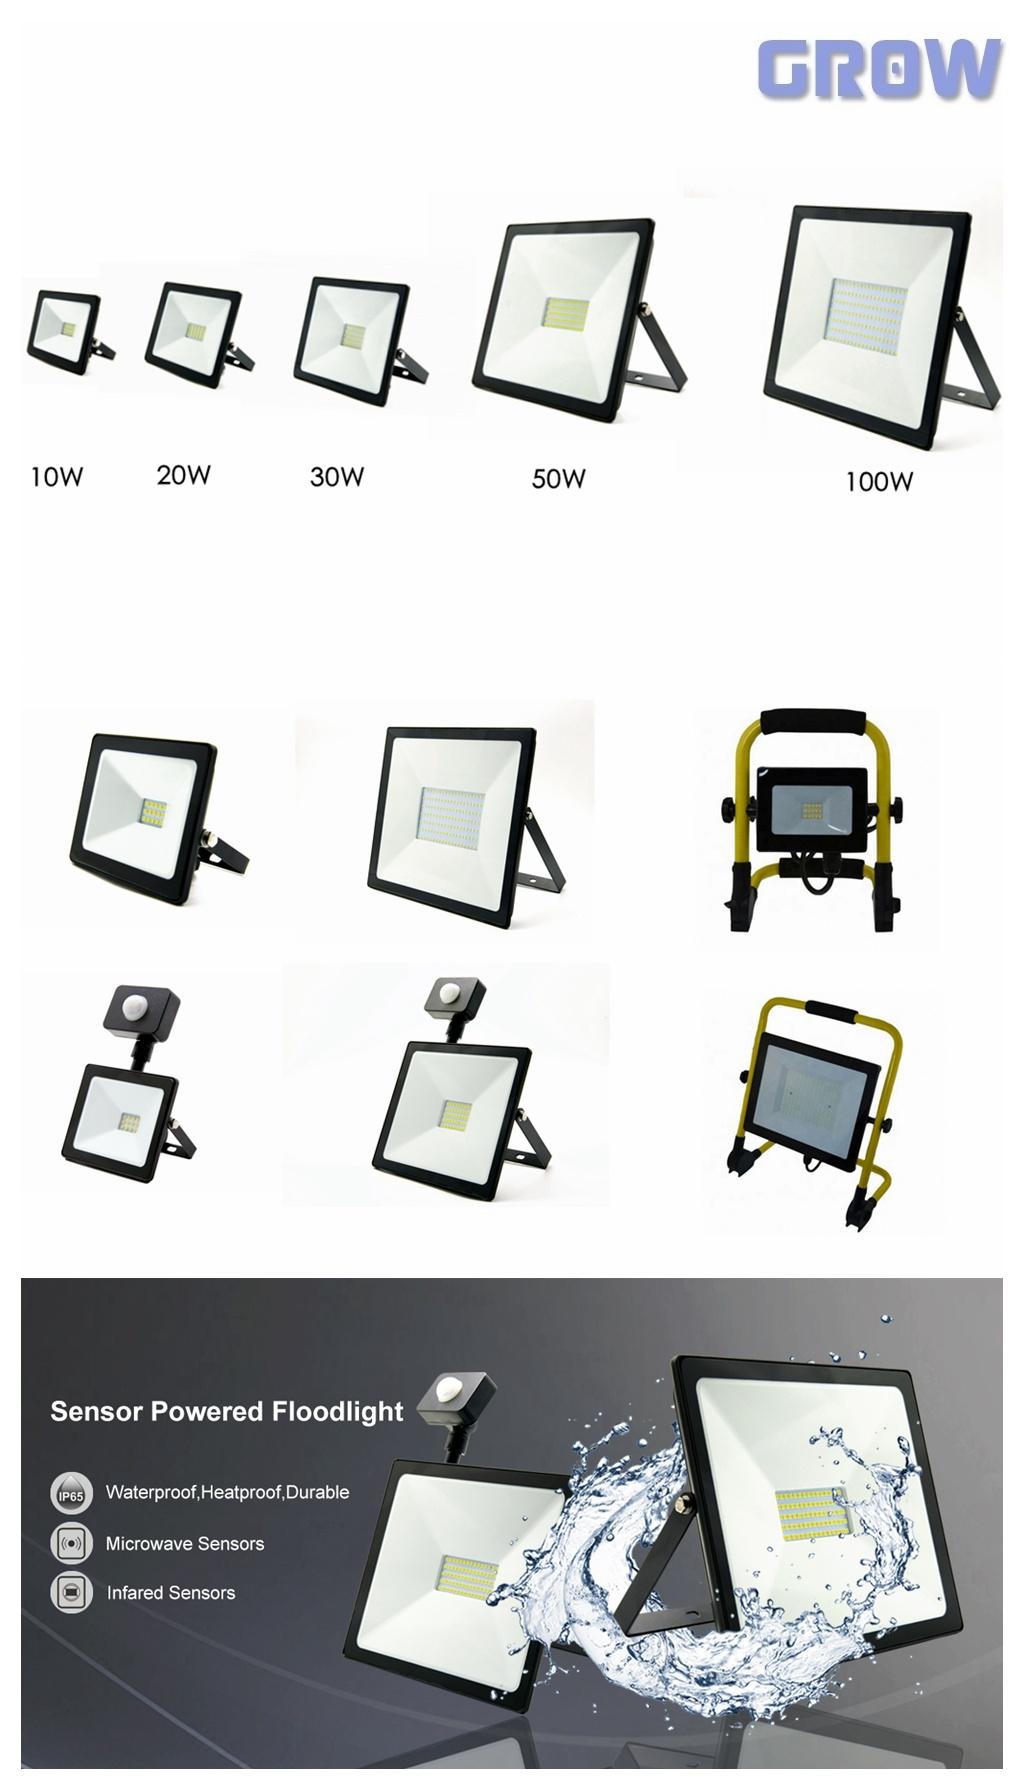 Chinese Factory High Quality Super Bright LED Floodlight 20W Waterproof IP65 for Outdoor Industrial Lighting